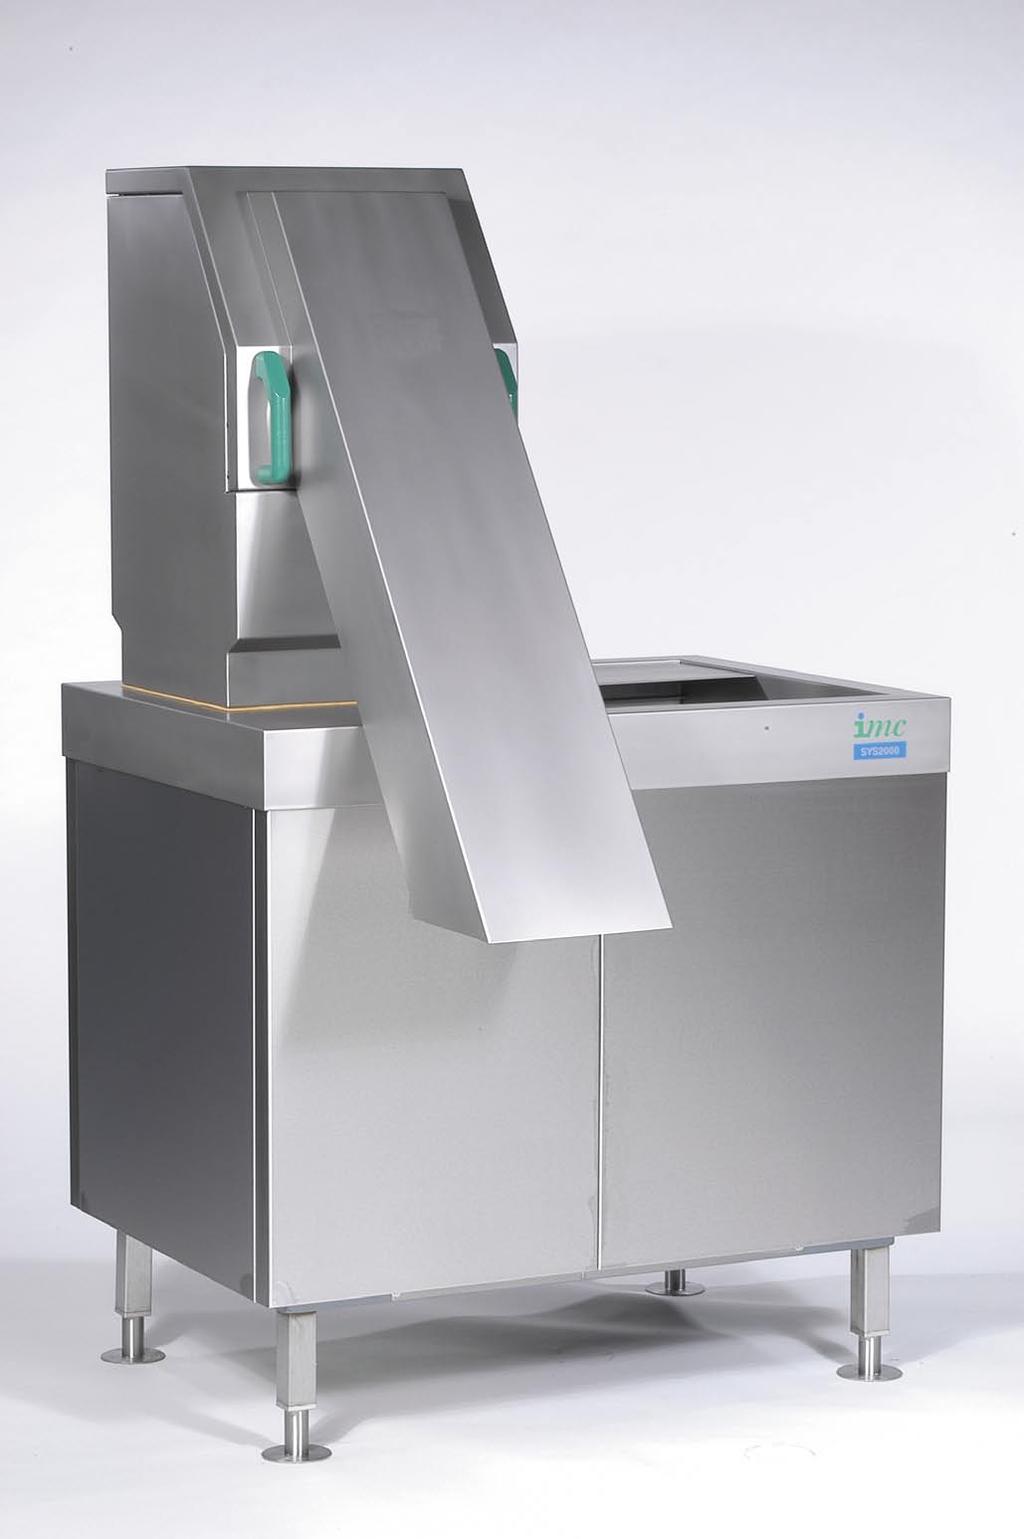 Designed to handle up to 450kg of waste per hour, the SYS2000 is capable of reducing solid food waste volume by up to 80%.